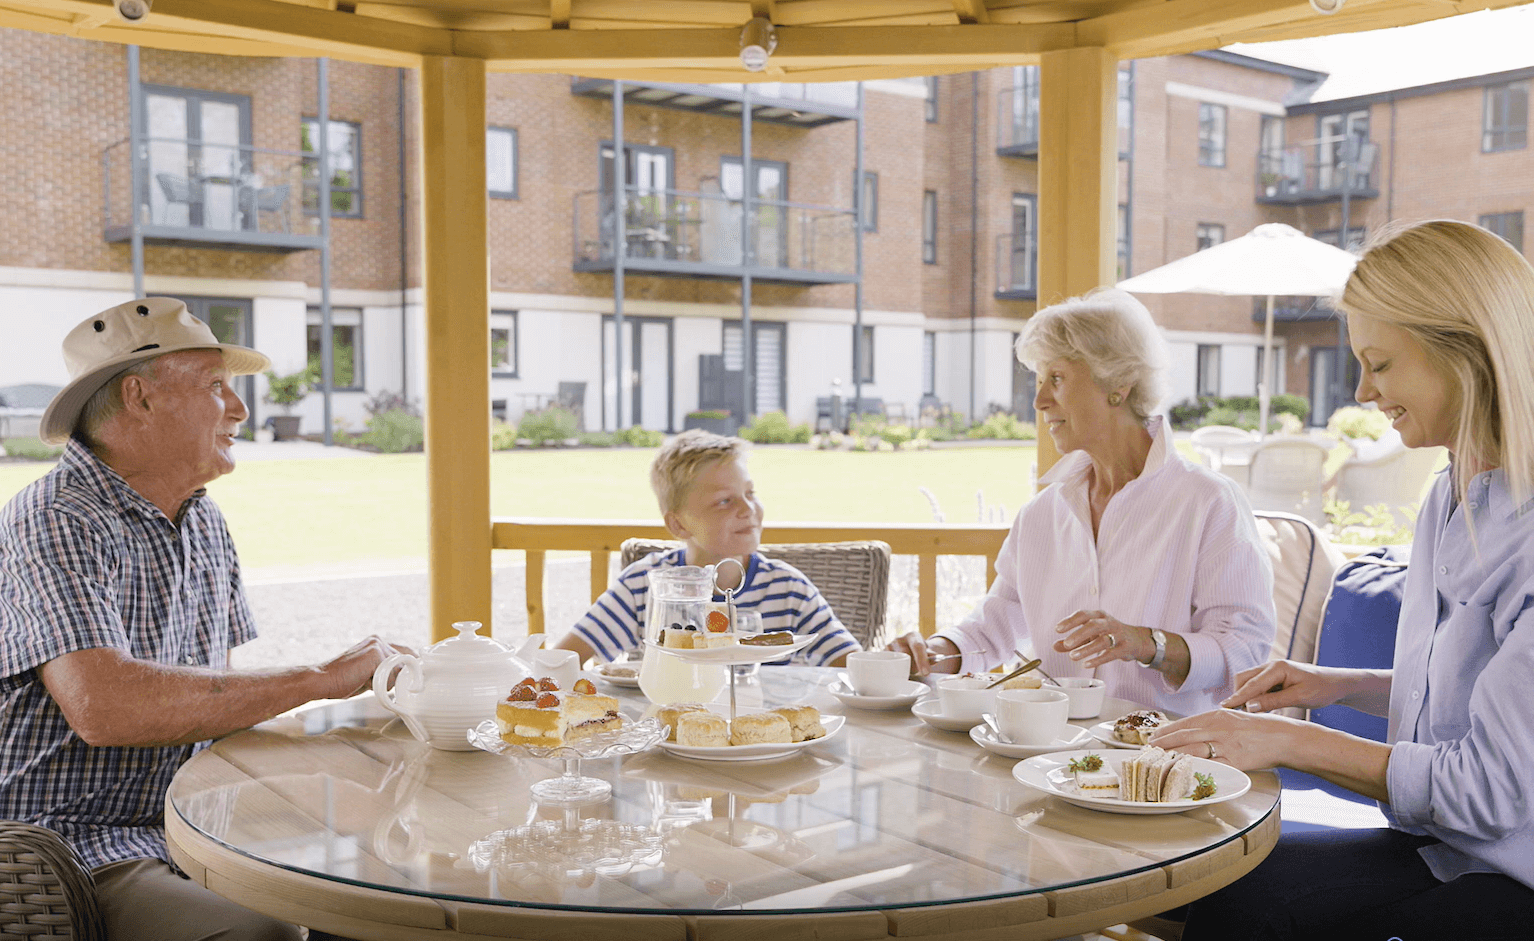 Retired couple enjoying afternoon tea in a summer house within landscaped gardens with their daughter and grandson.